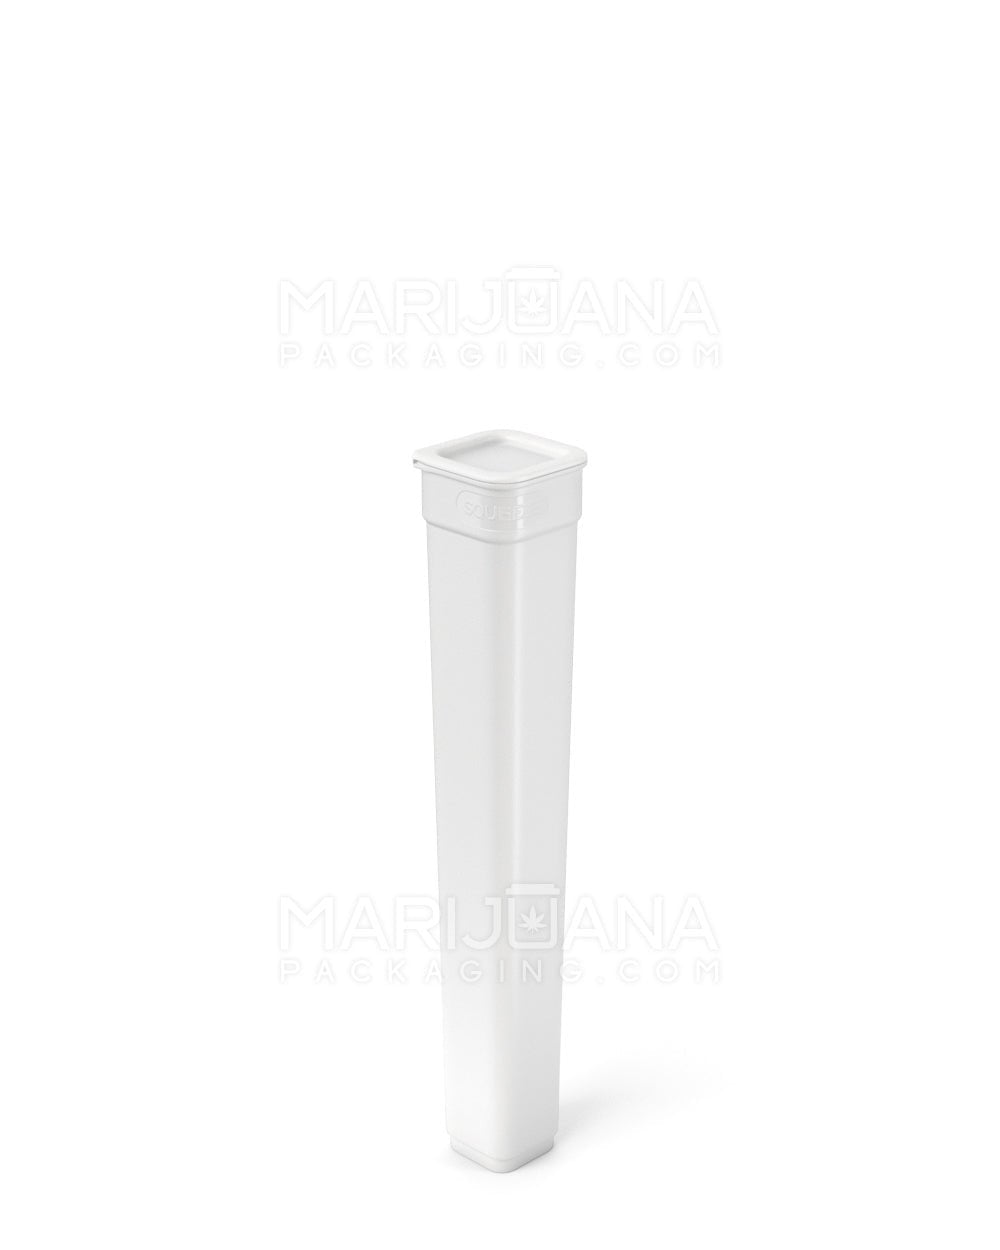 POLLEN GEAR | 100% Recyclable Opaque Pop Box Pop Top Plastic Pre-Roll Tubes | 119mm - White - 1840 Count - 5